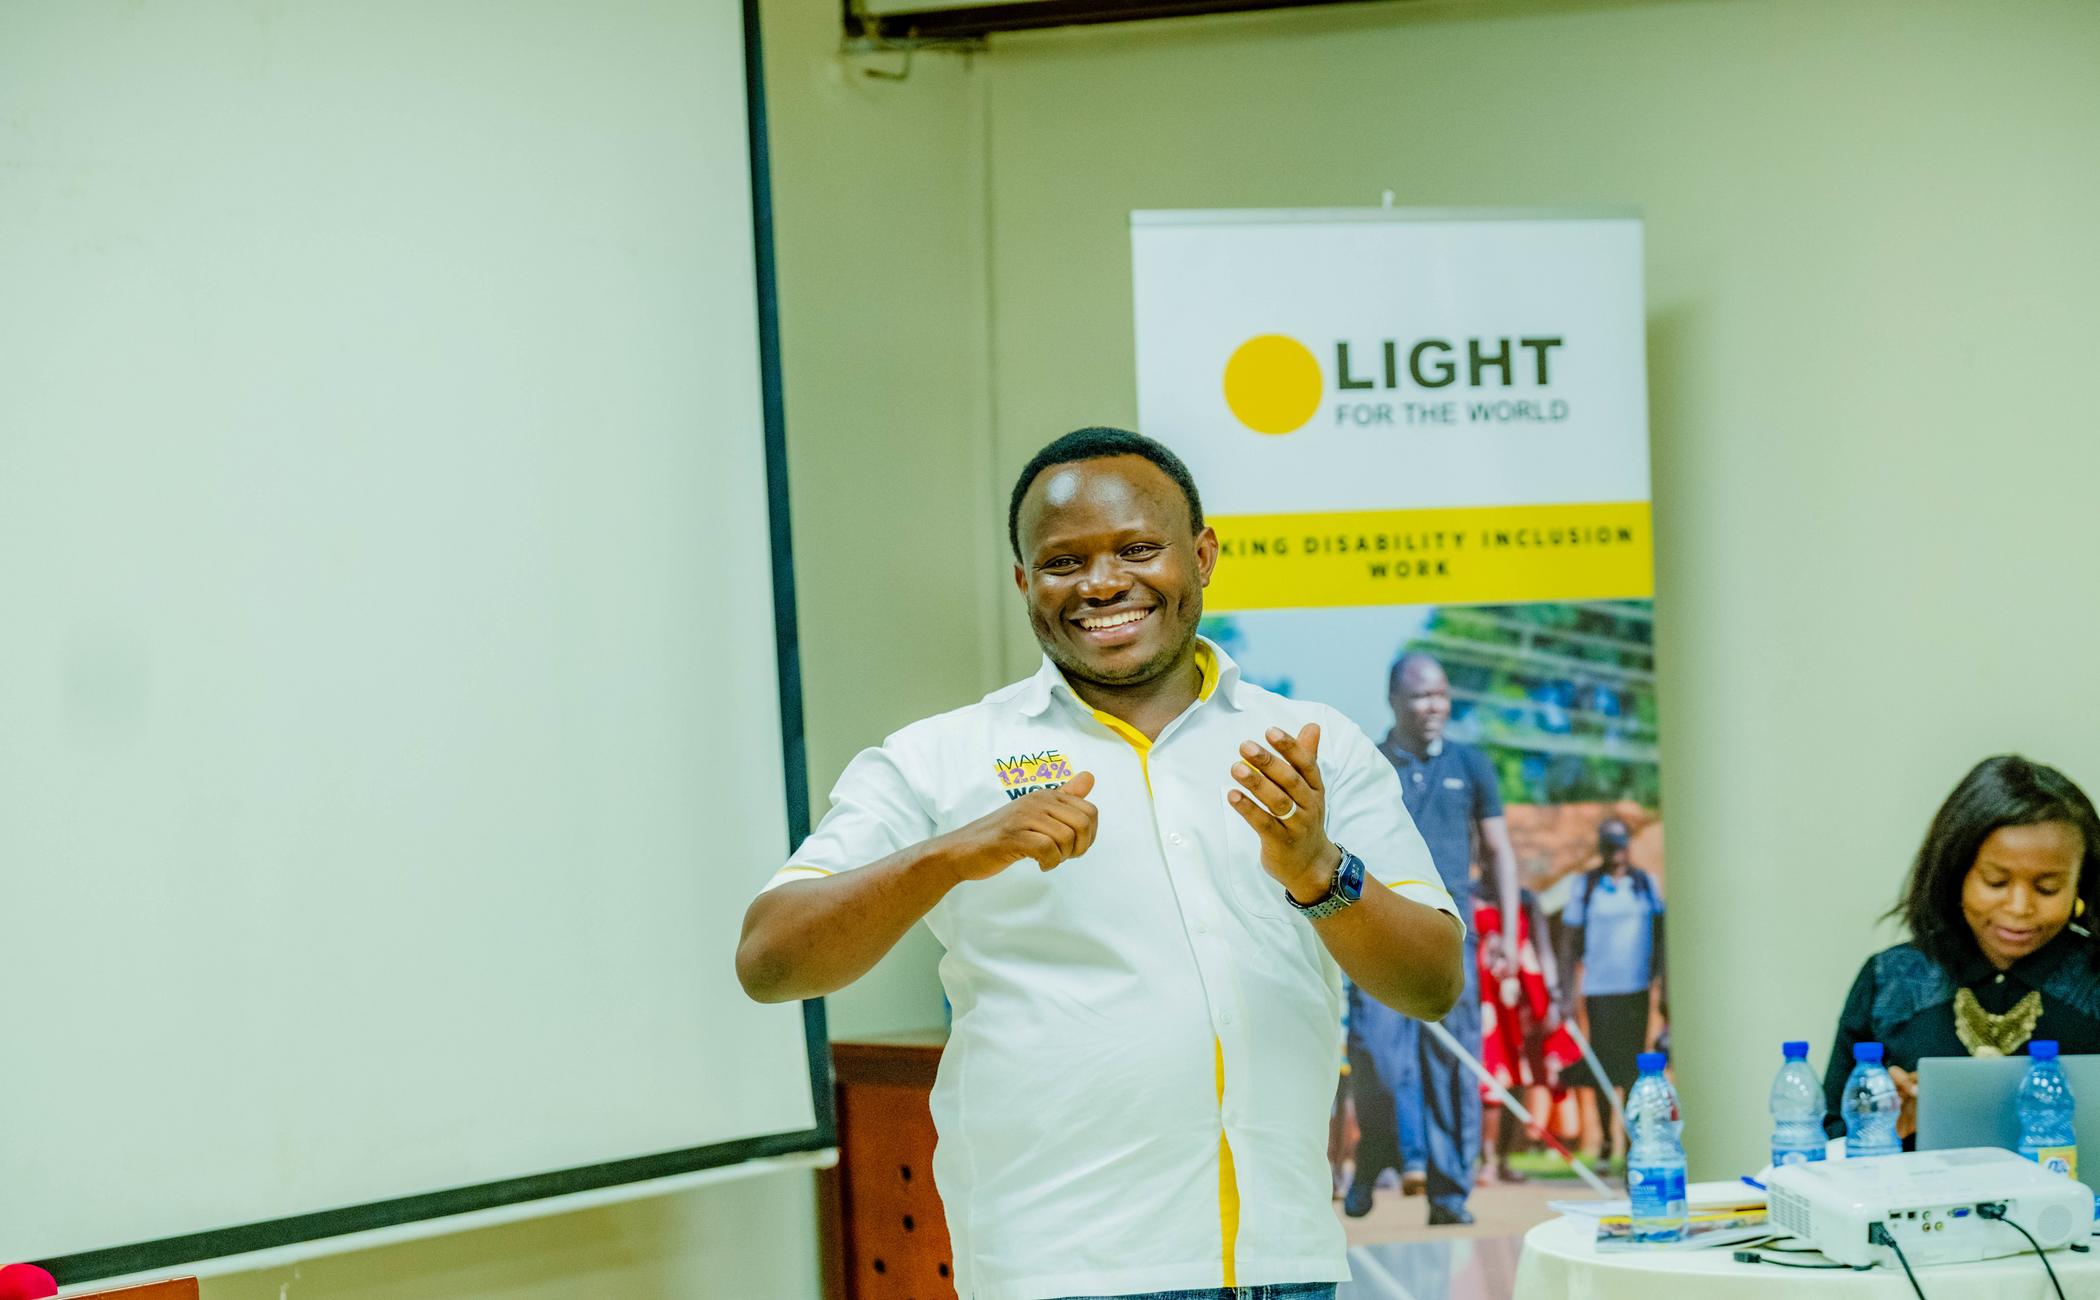 Ambrose Murangira stands smiling in front of a Light for the World sign